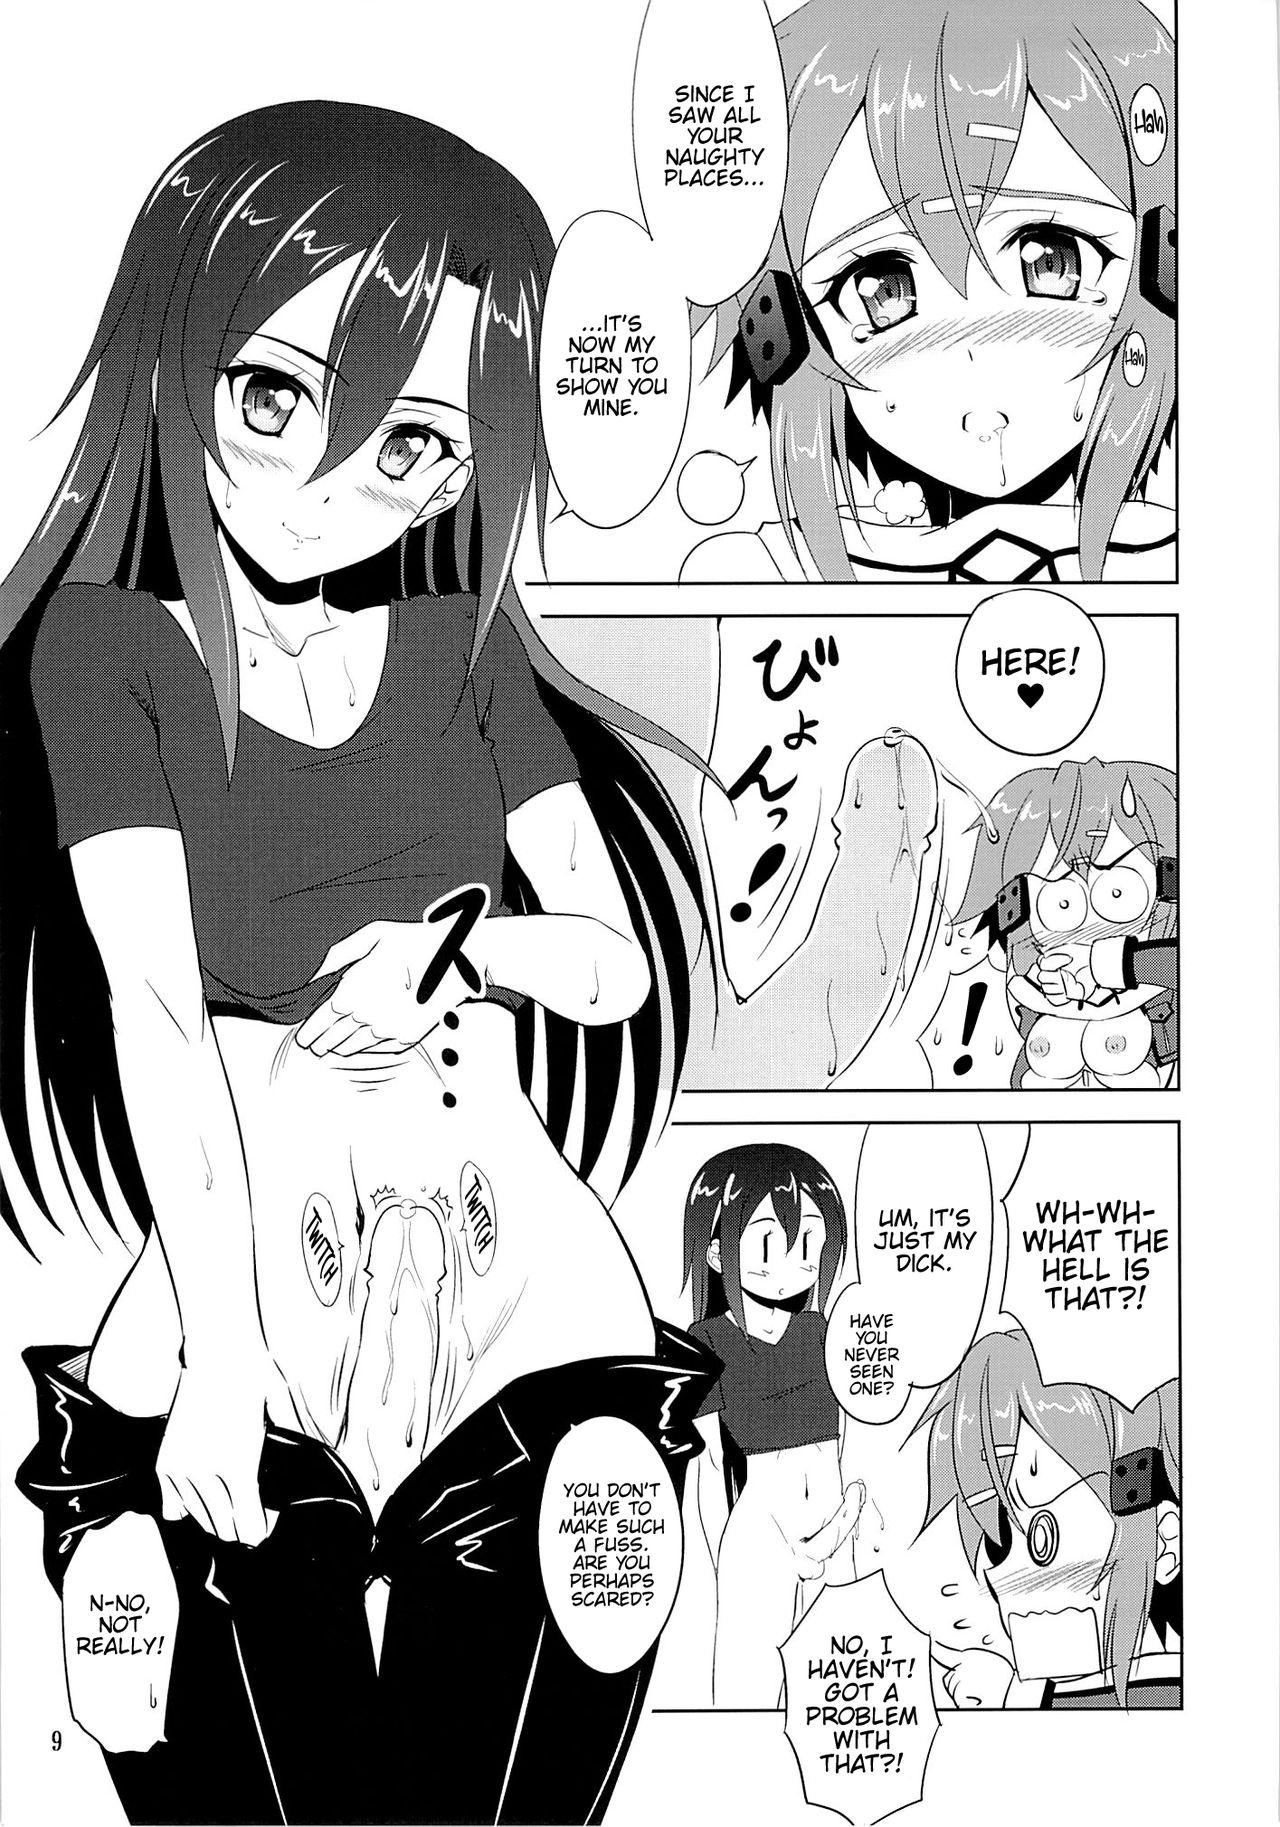 Squirting Gyakushuu no Shinon - Sword art online Best Blow Jobs Ever - Page 8